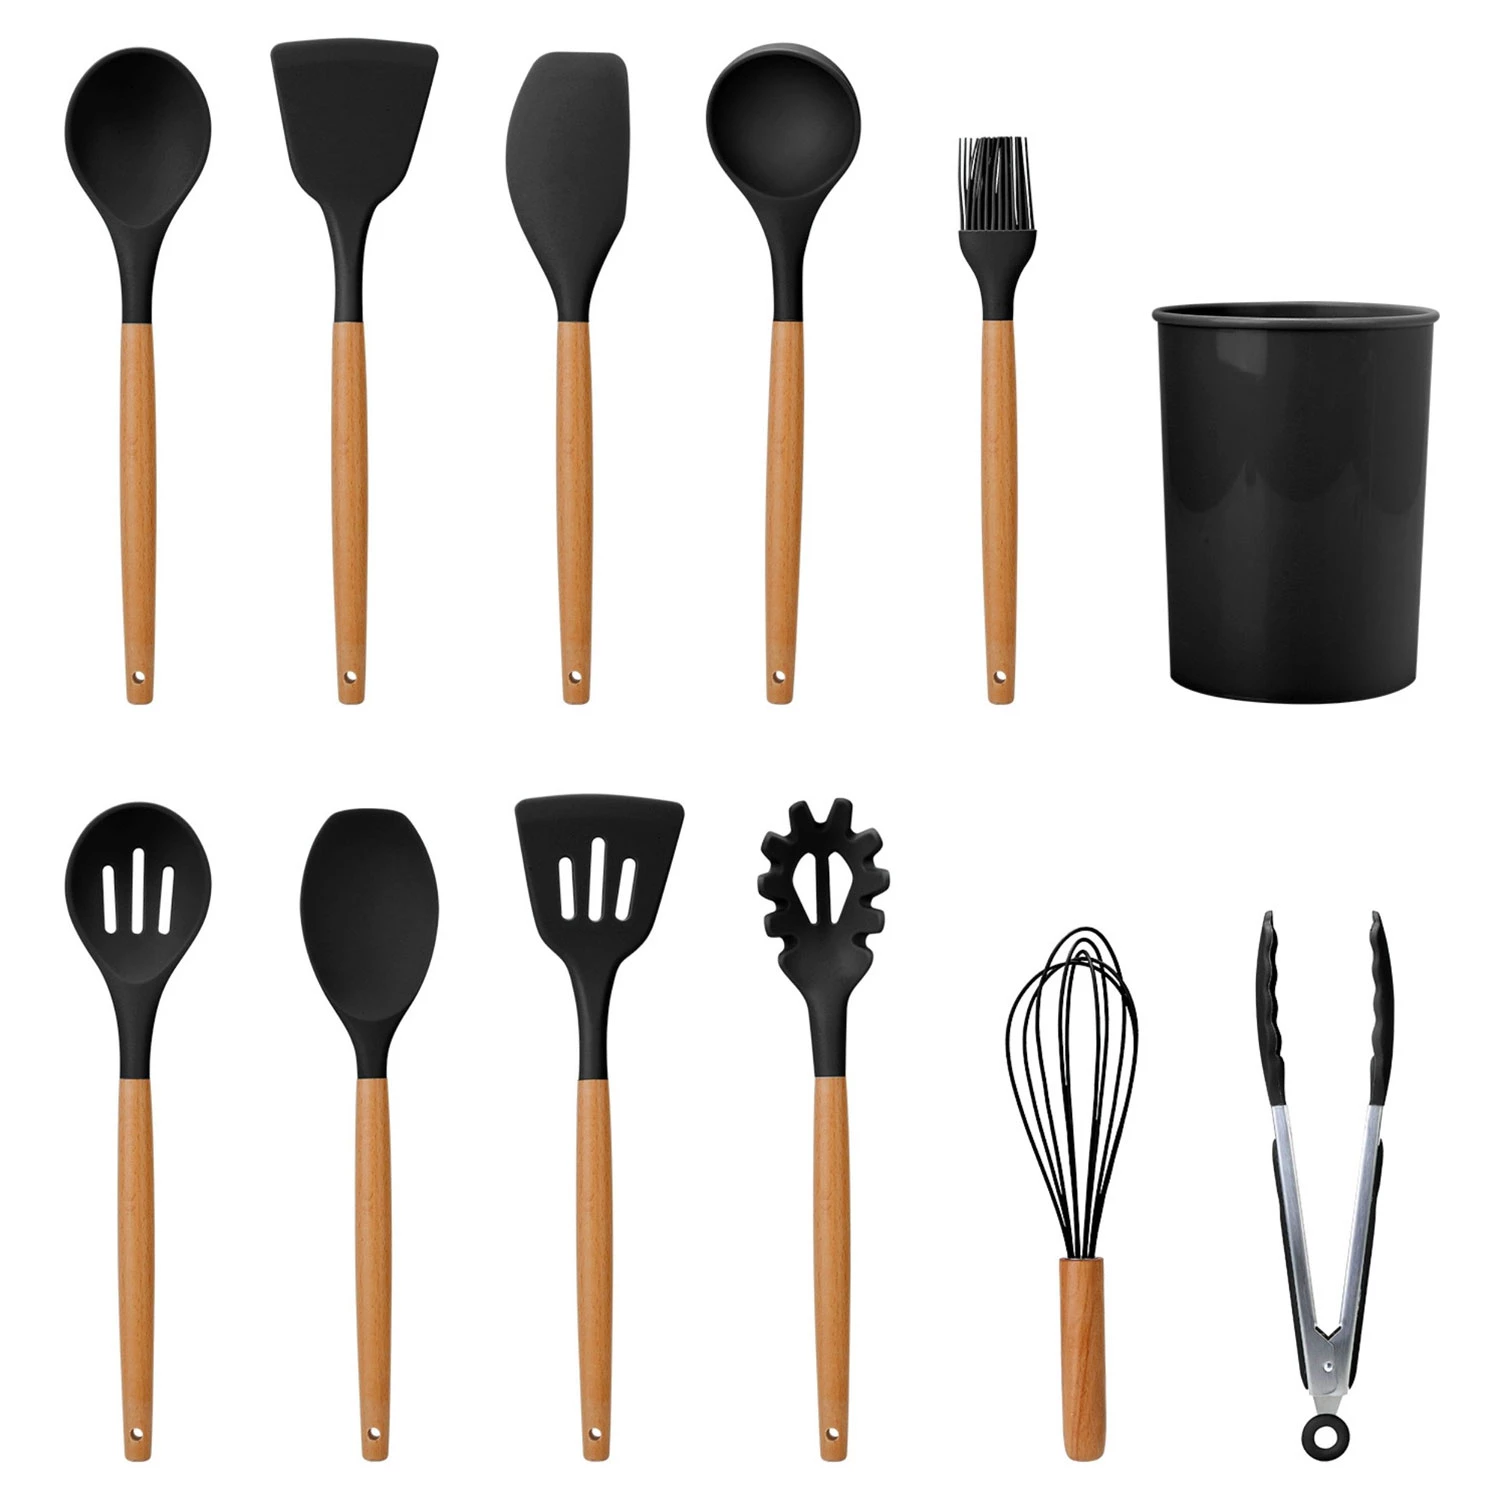 11-piece Silicone Cooking Utensil Set With Heat-resistant Wooden Handle - Spatula, Turner, Ladle